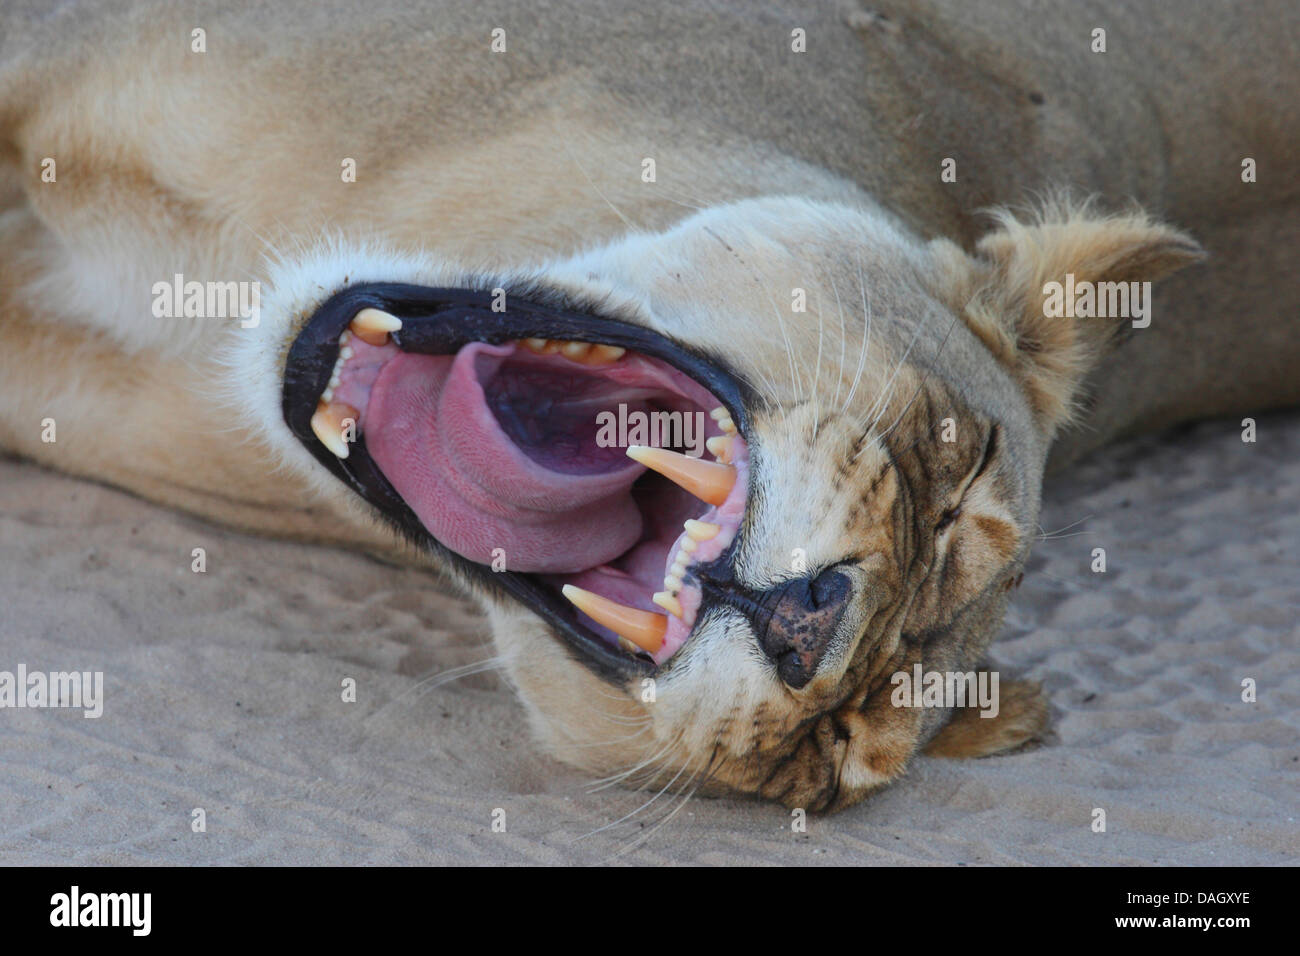 lion (Panthera leo), portrait of a female lying in the sand yawning, South Africa, Kgalagadi Transfrontier National Park Stock Photo